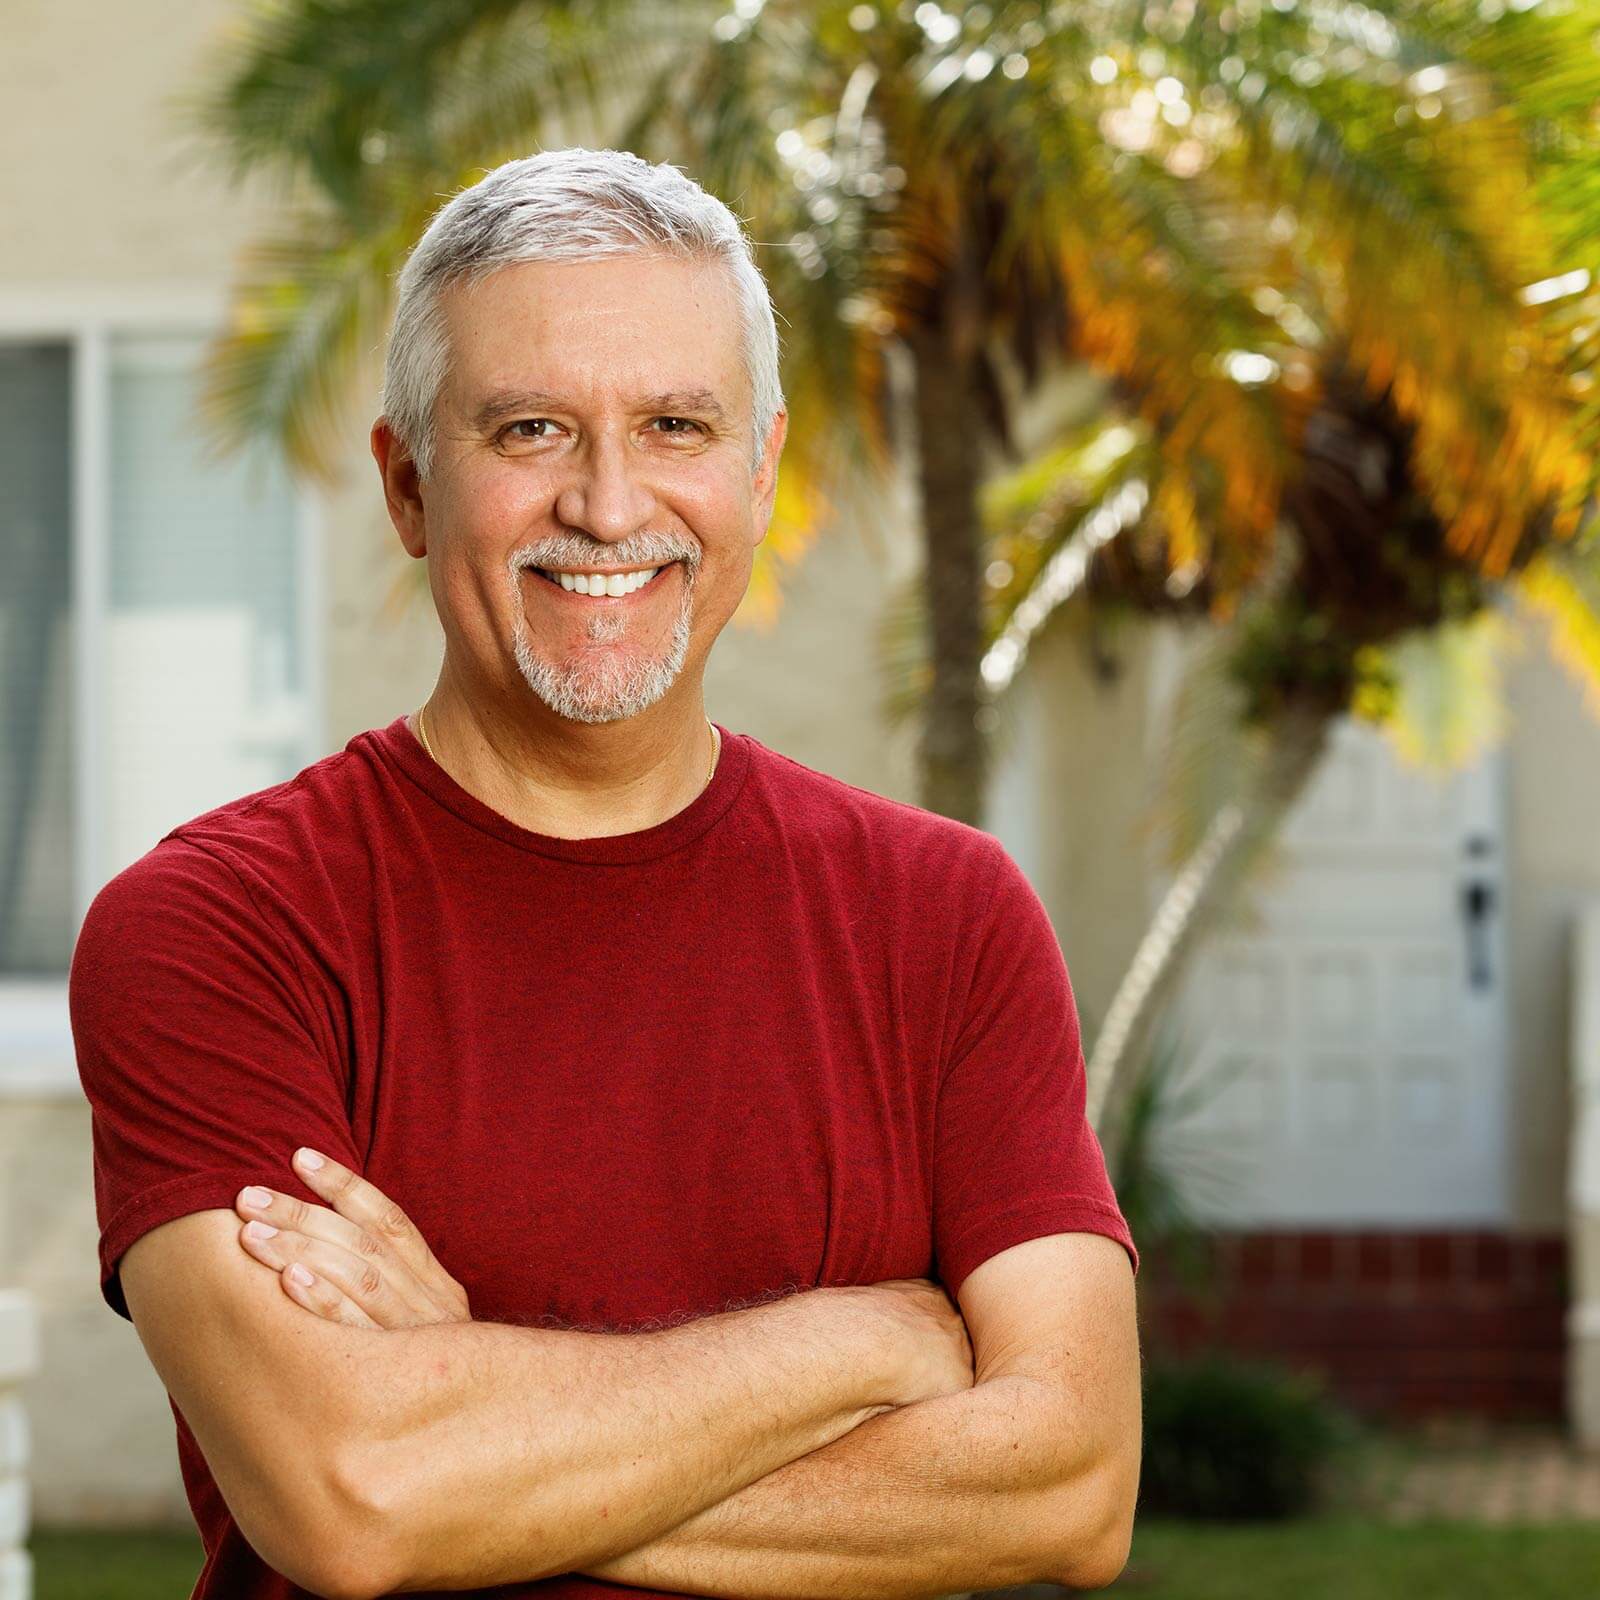 Man Smiling in Front of Palm Trees